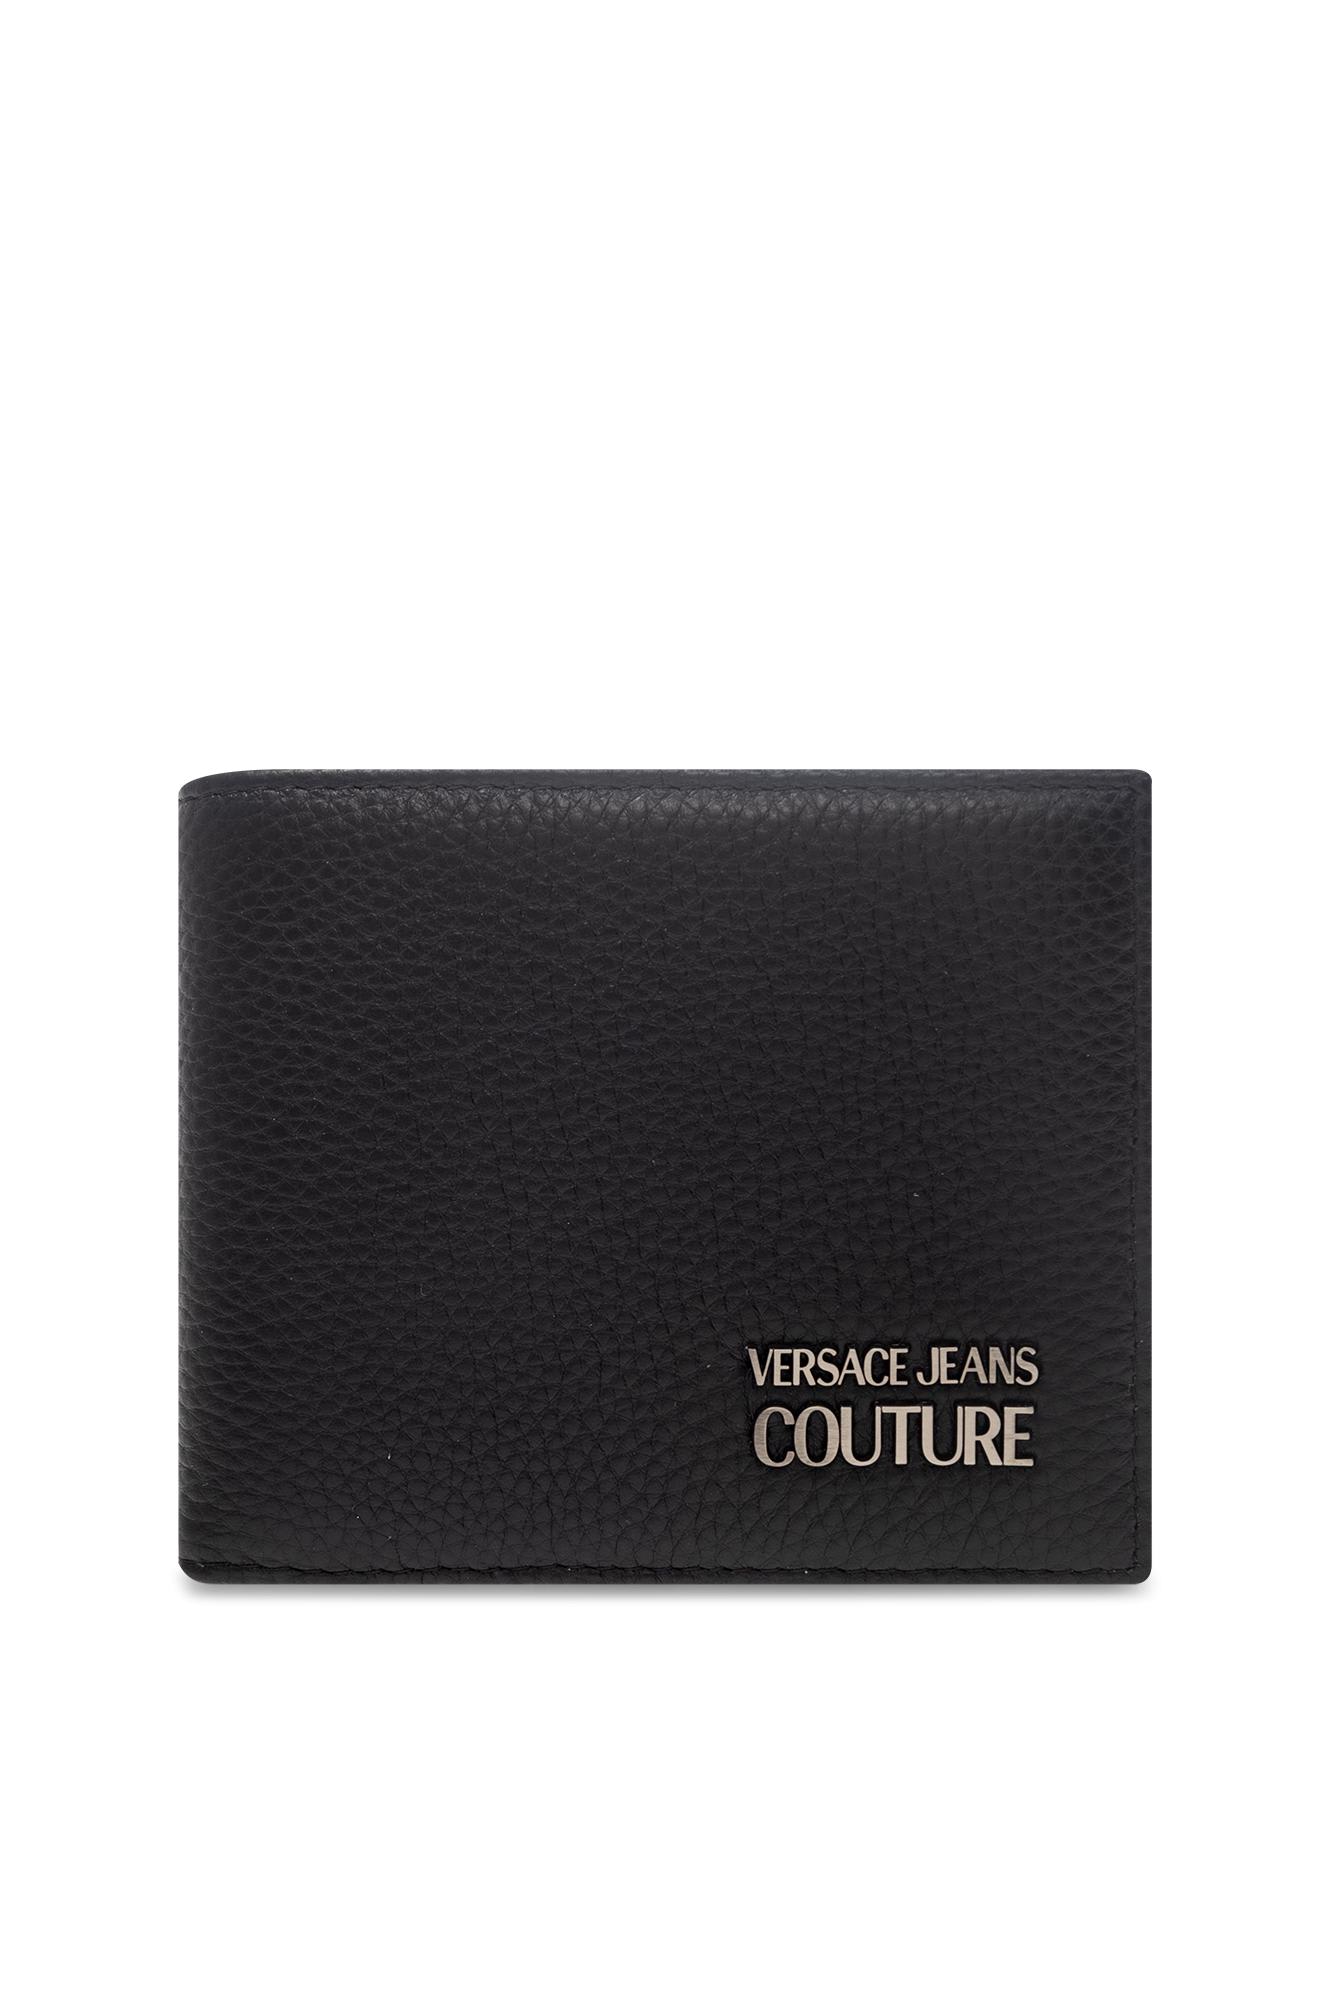 Versace Jeans Couture Wallet